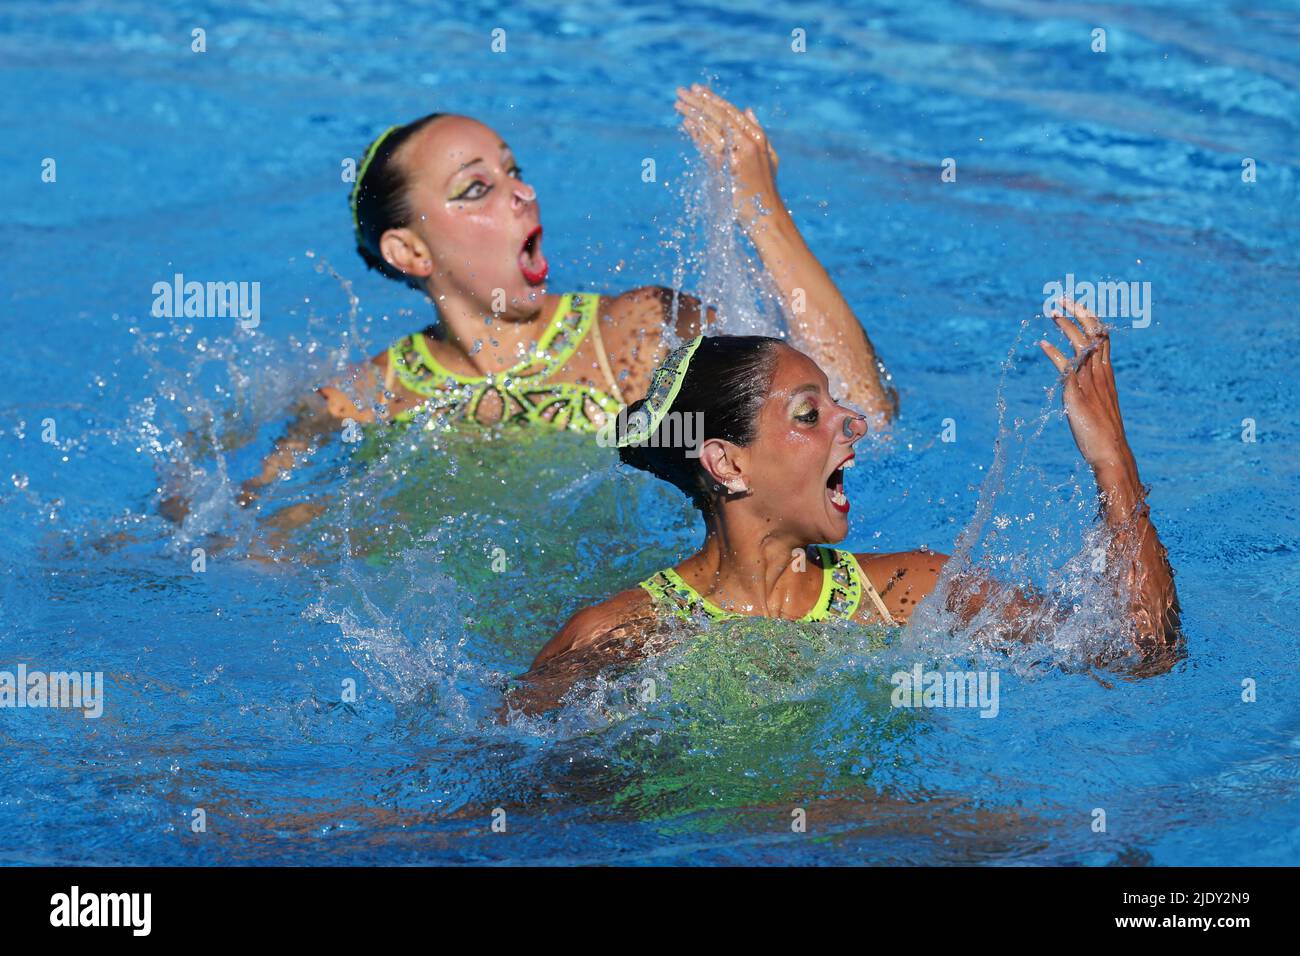 Budapest, Hungary. 23rd June, 2022. Linda Cerruti and Costanza Ferro of Italy perform during the Artistic Swimming Women Duet Free Final in Budapest, Hungary, June 23, 2022. Credit: Zheng Huansong/Xinhua/Alamy Live News Stock Photo